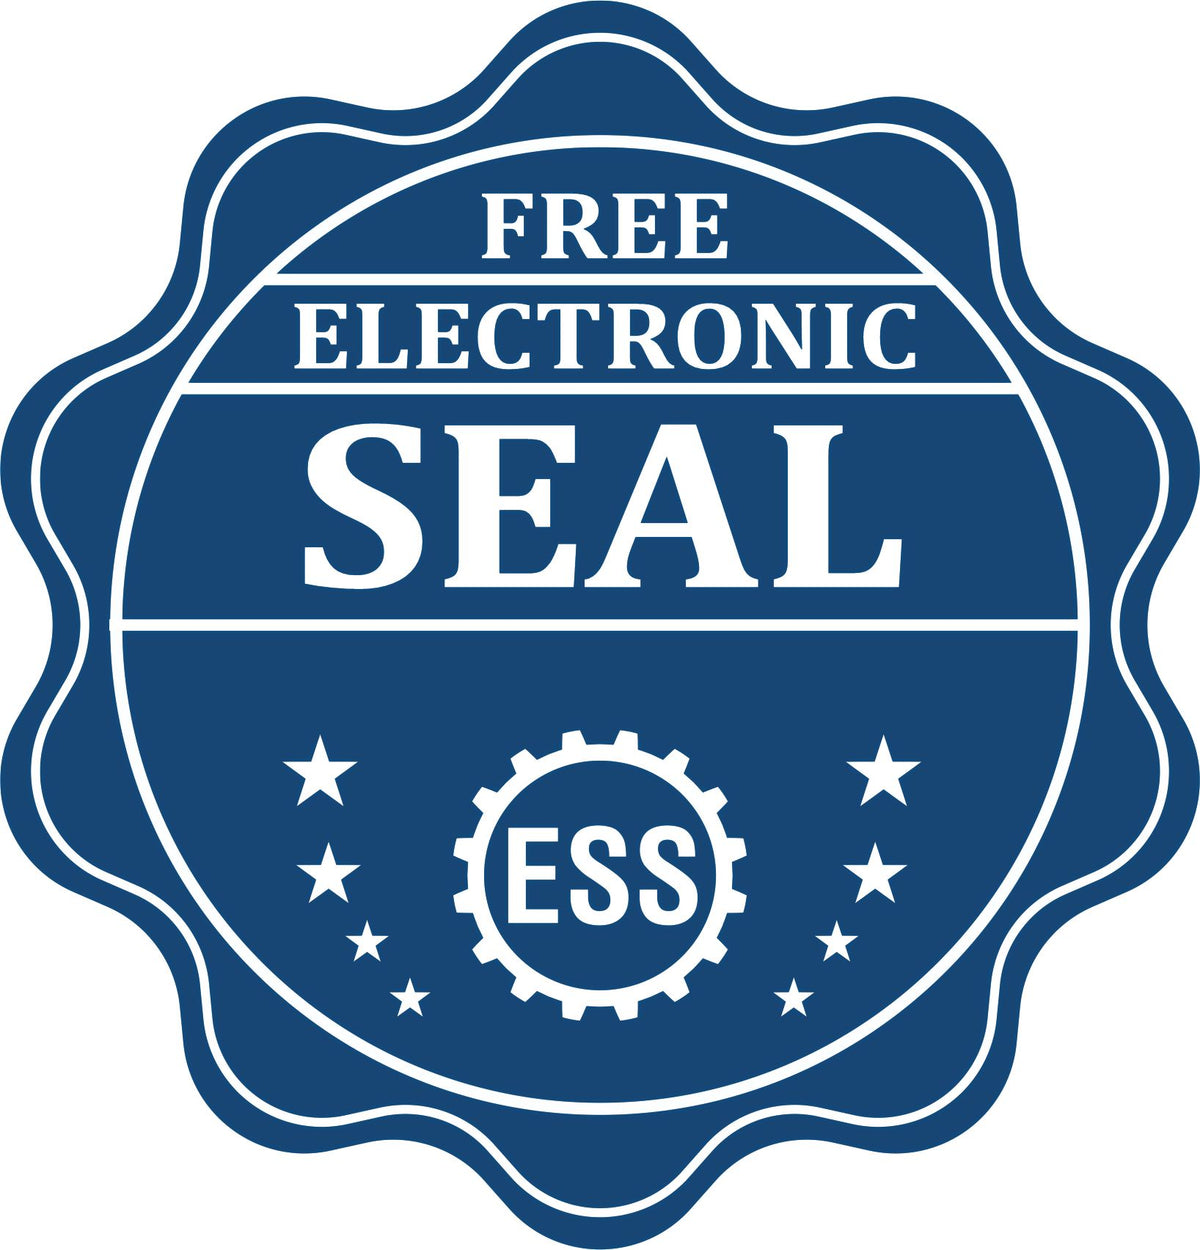 A badge showing a free electronic seal for the Hybrid Virginia Landscape Architect Seal with stars and the ESS gear on the emblem.